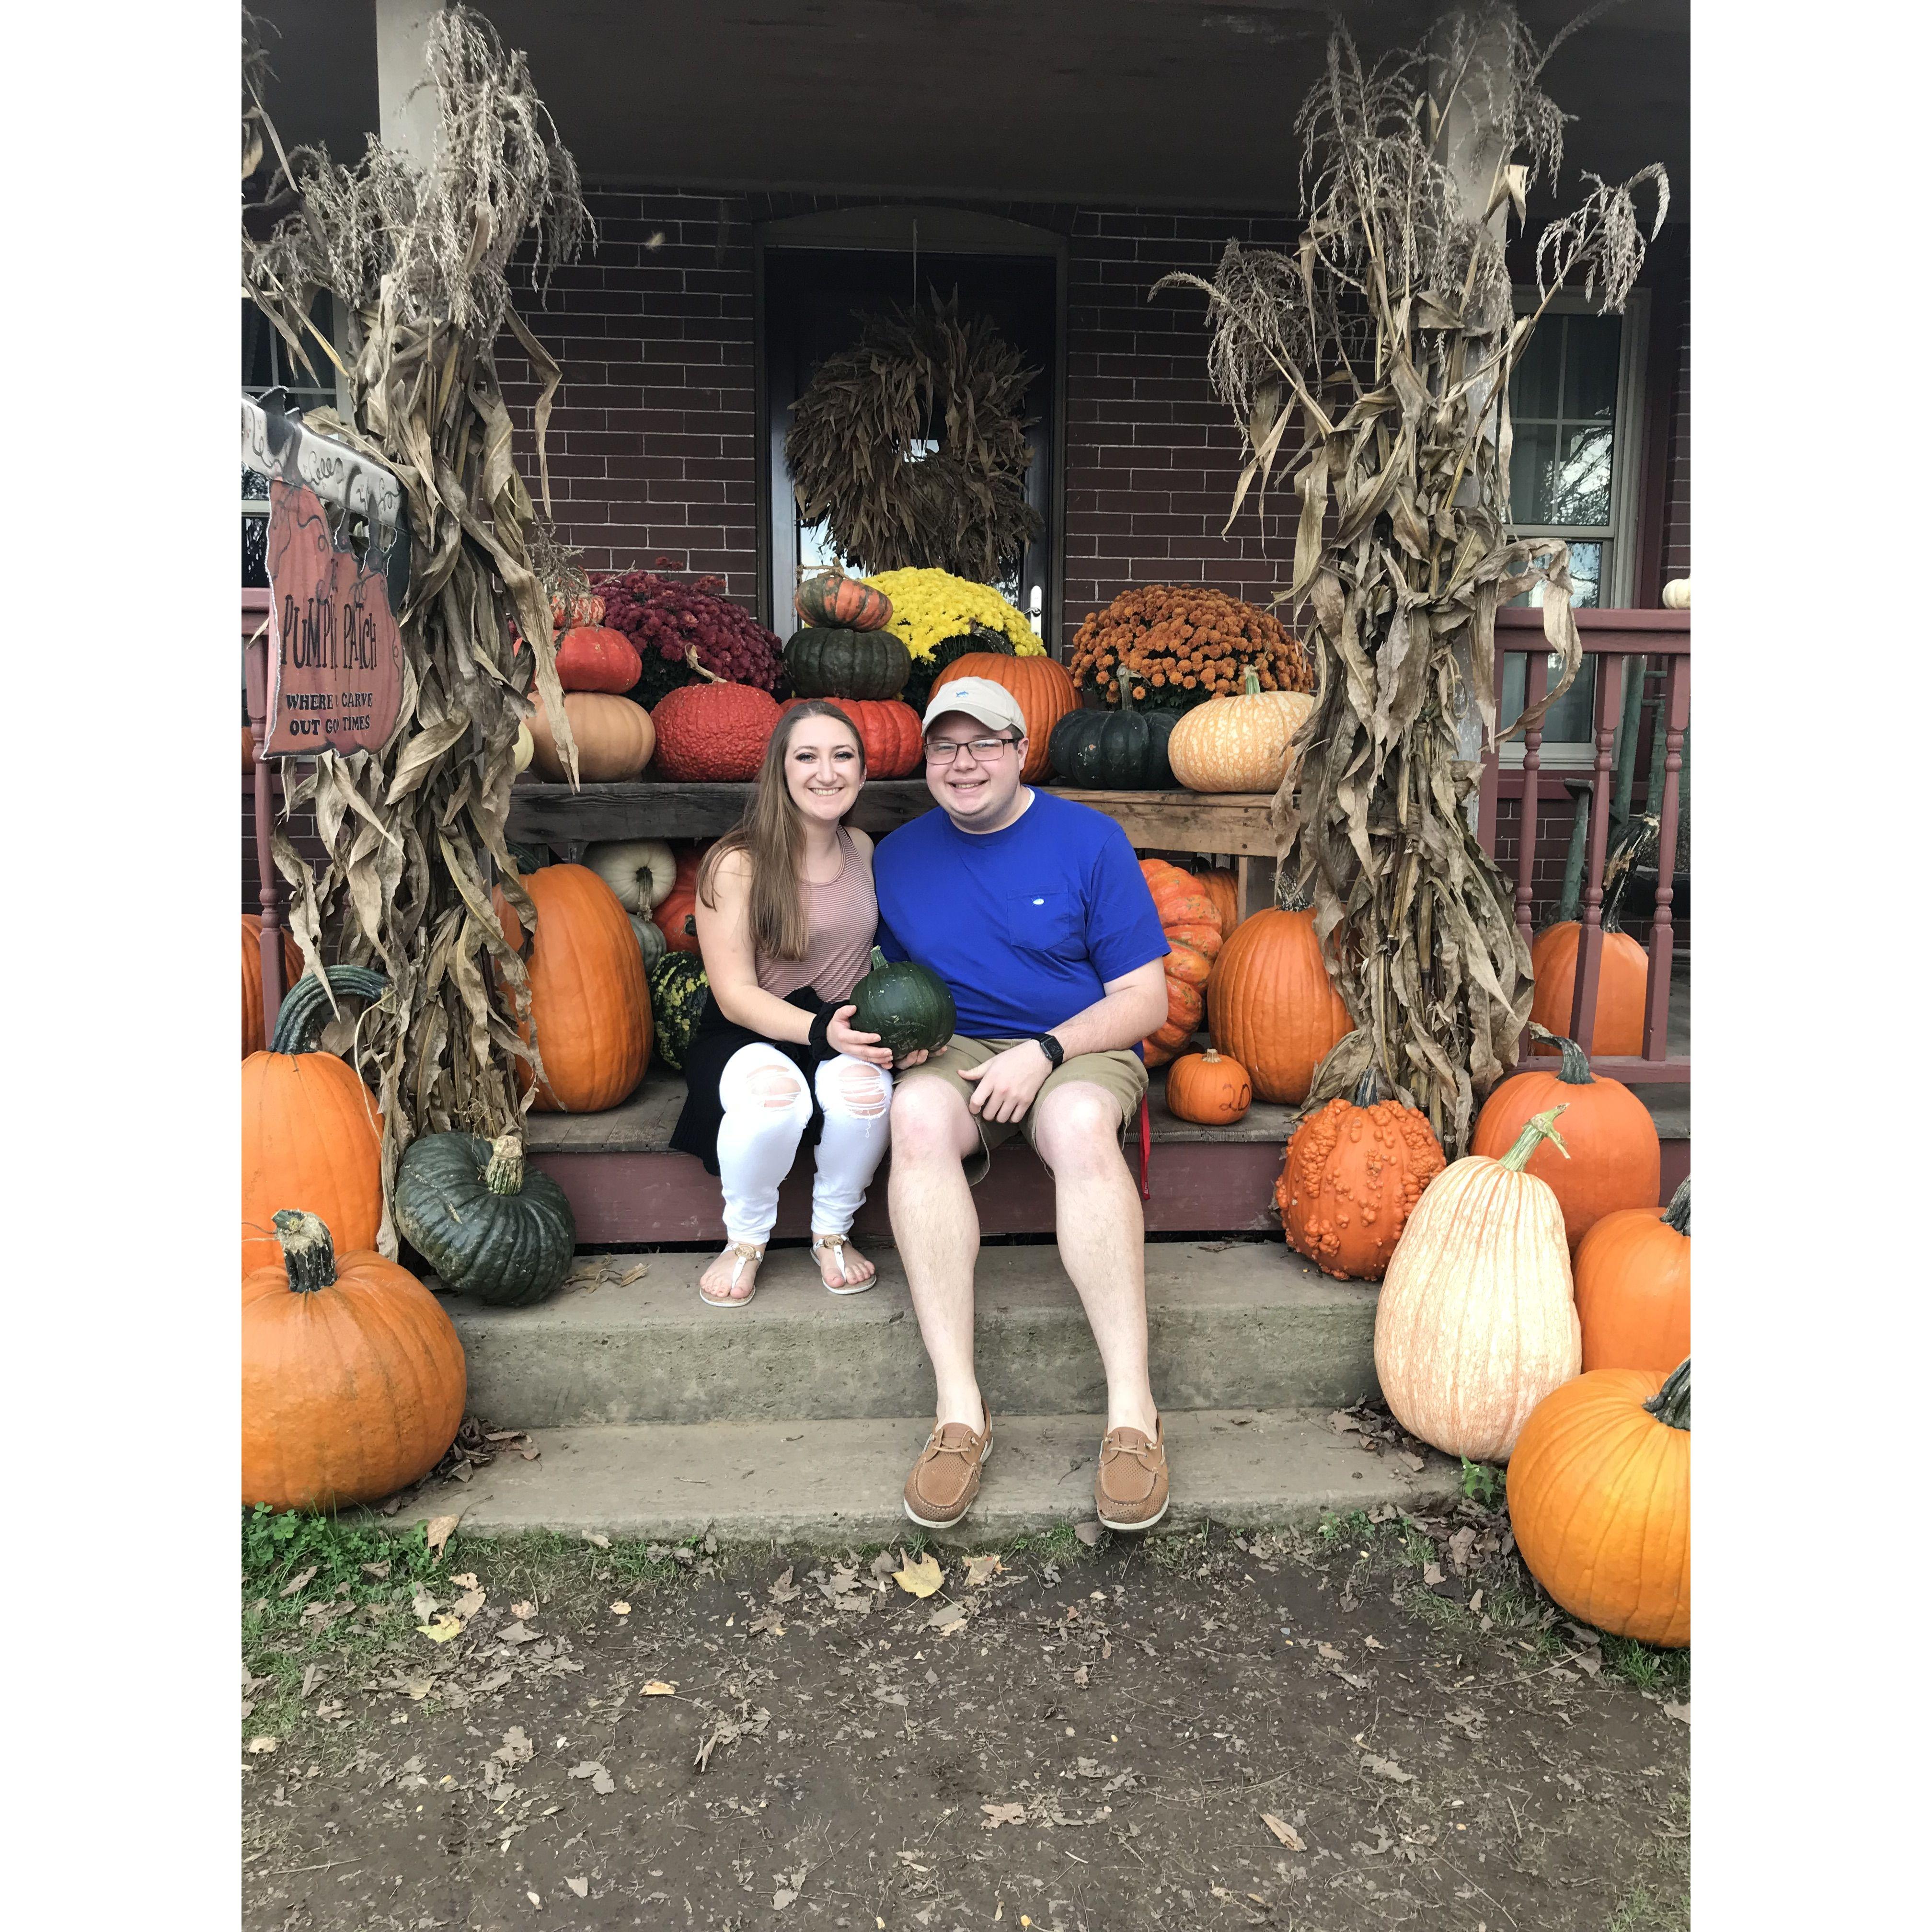 Our first year dating (2017) at a pumpkin patch near Lock Haven University.